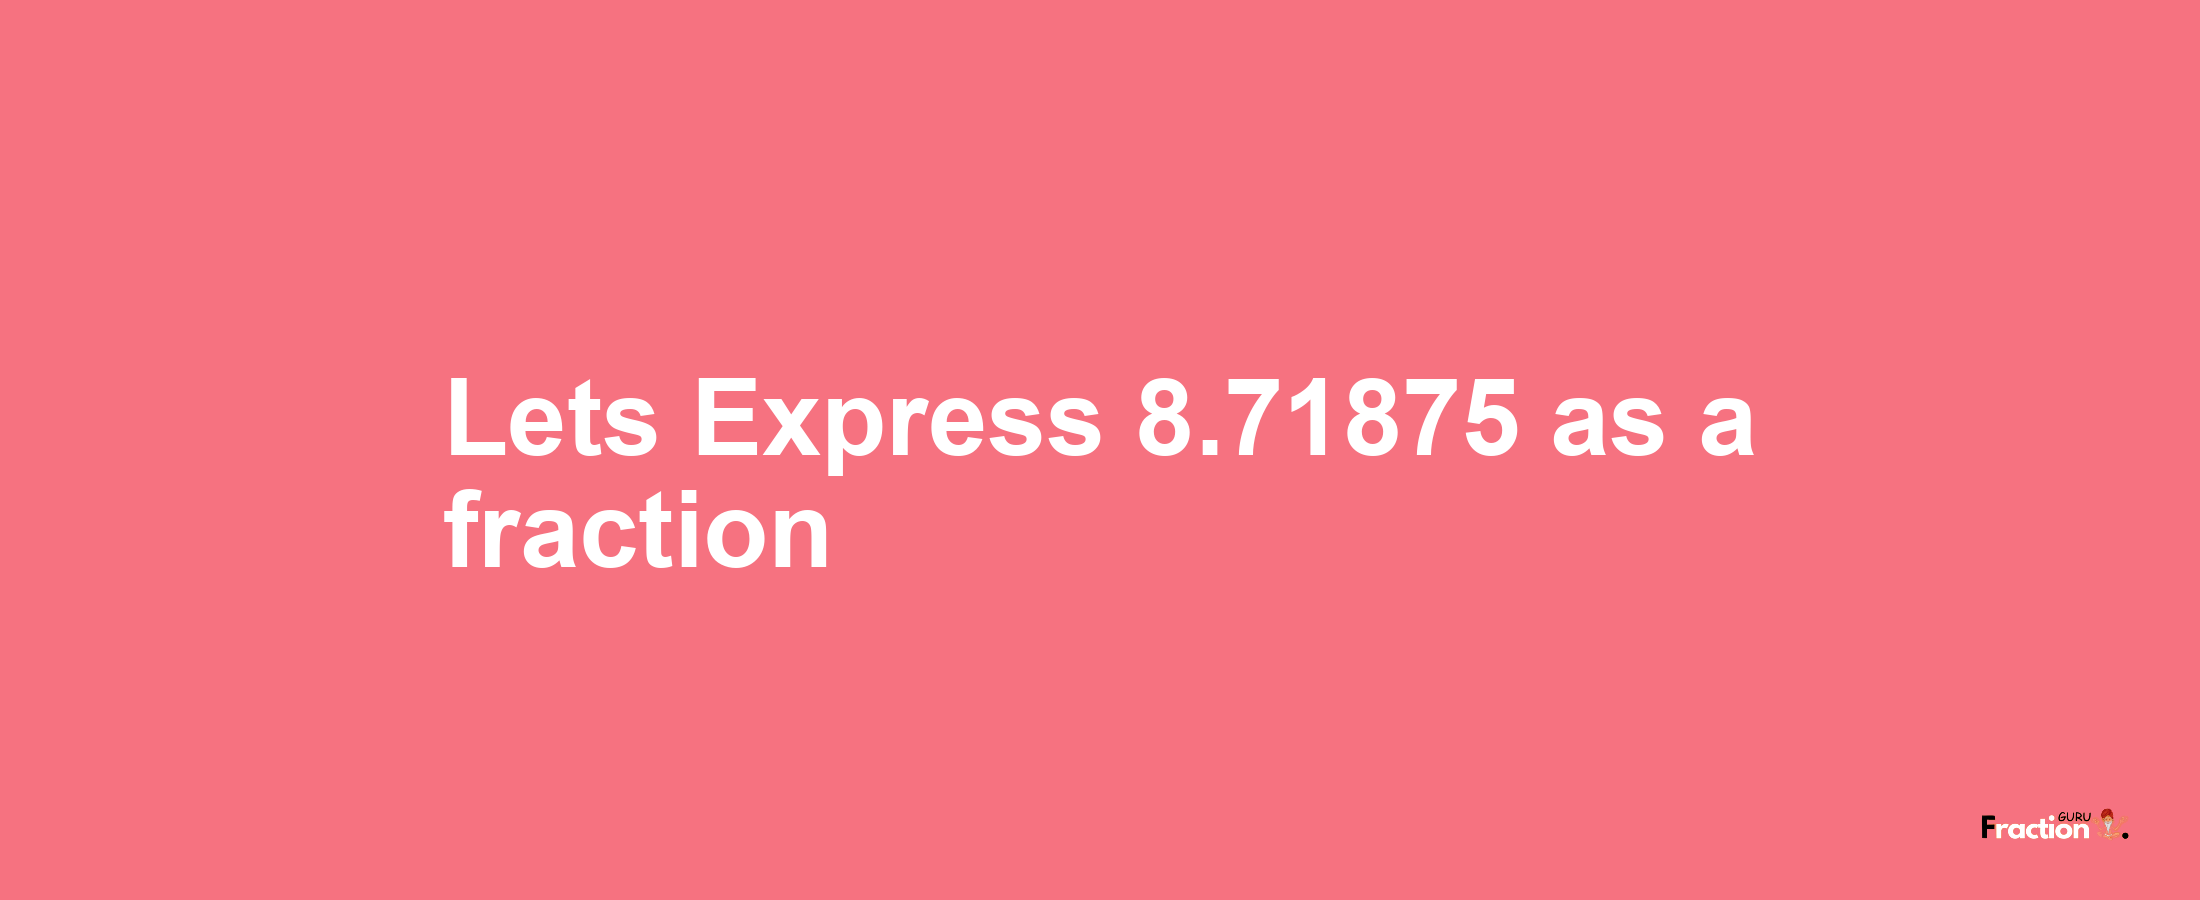 Lets Express 8.71875 as afraction